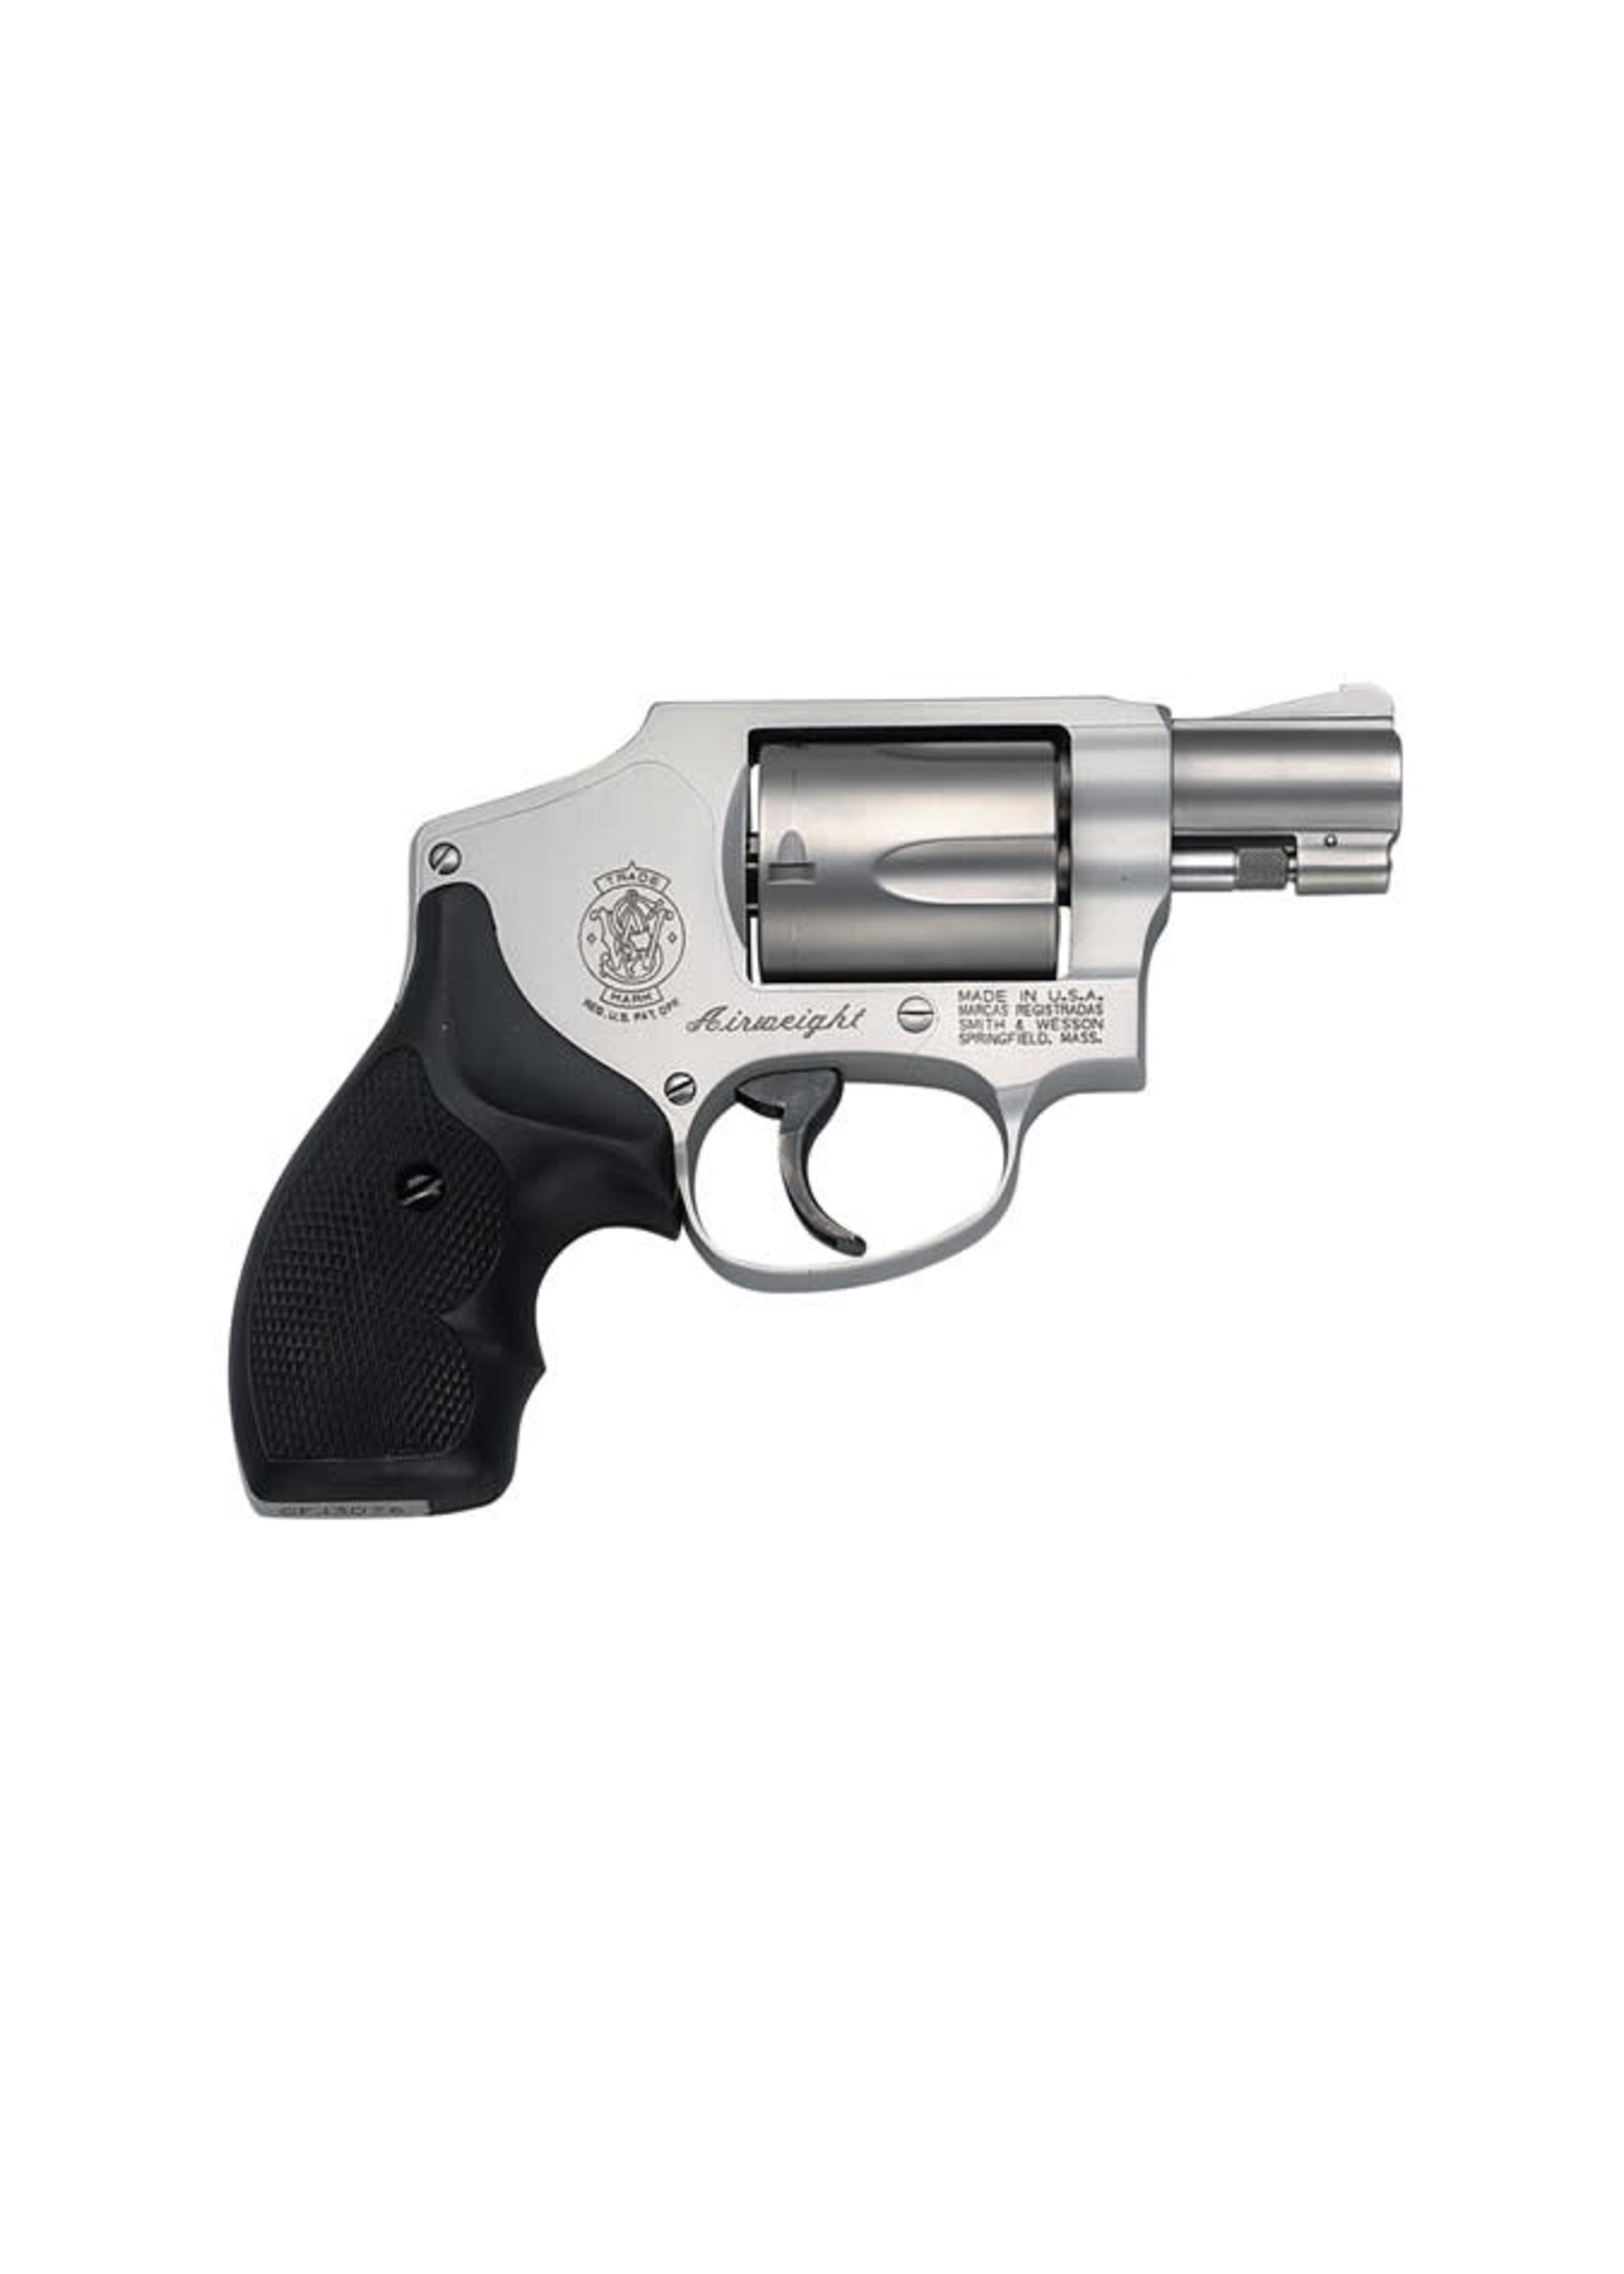 Smith and Wesson (S&W) Smith & Wesson 642 Airweight 38 S&W Spl +P 5rd 1.88" Stainless Matte, Black Polymer Grip